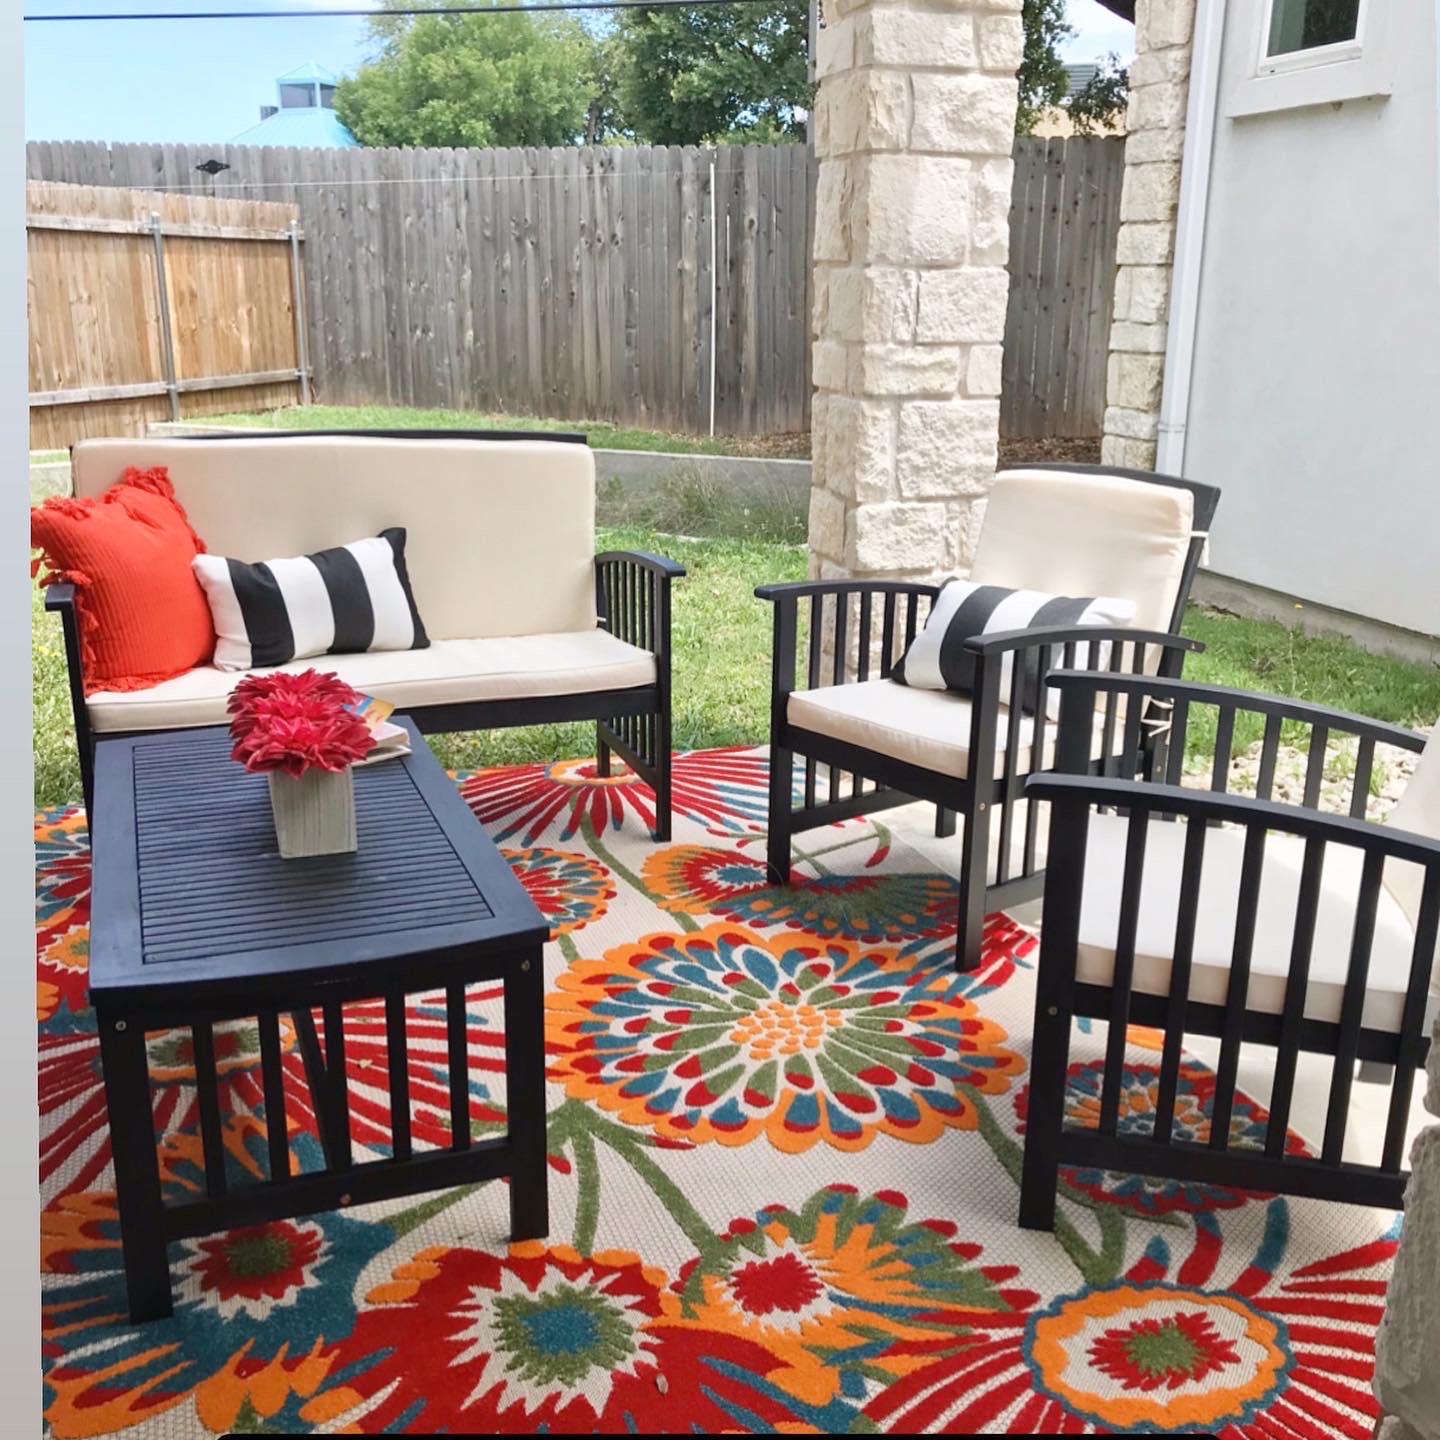 Catenya McHenry assembles the Lark Manor 4 piece sofa and outdoor furniture set from Wayfair